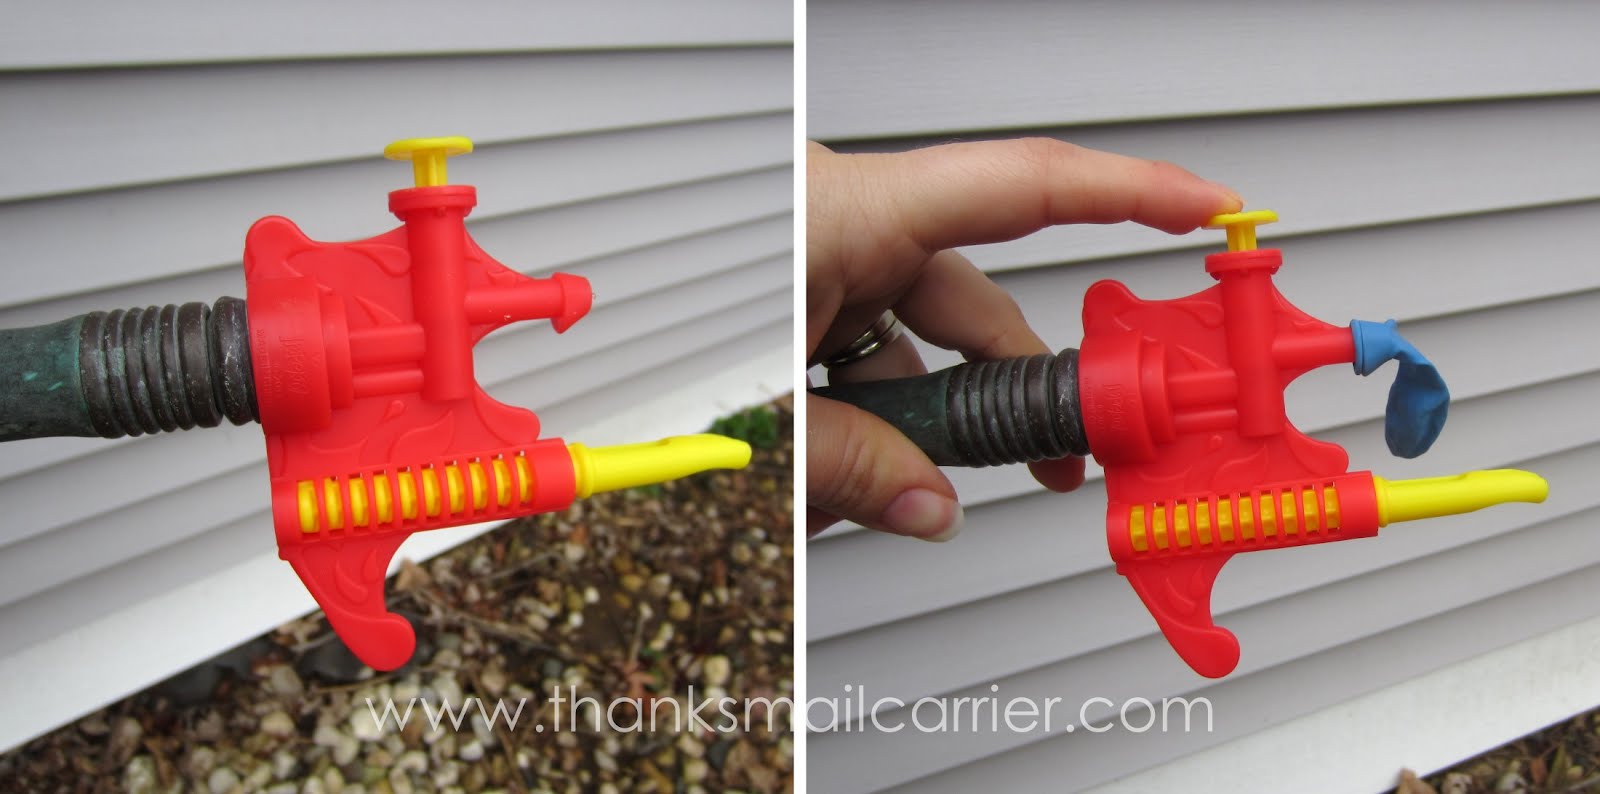 Tie-Not Water Balloon Filler and Tying Tool